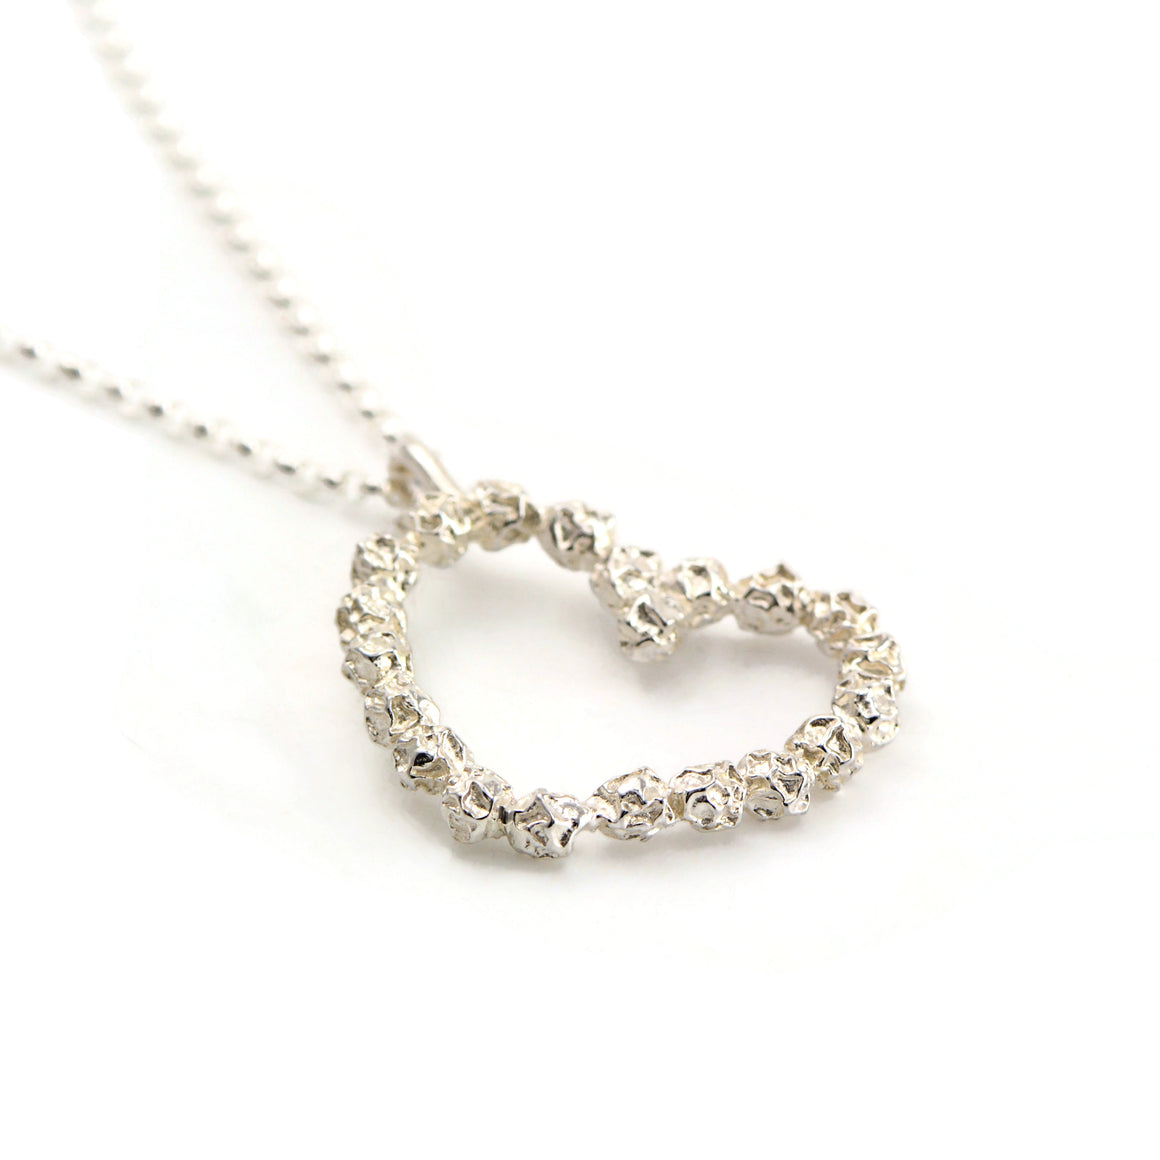 A love heart pendant in solid sterling silver peppercorns